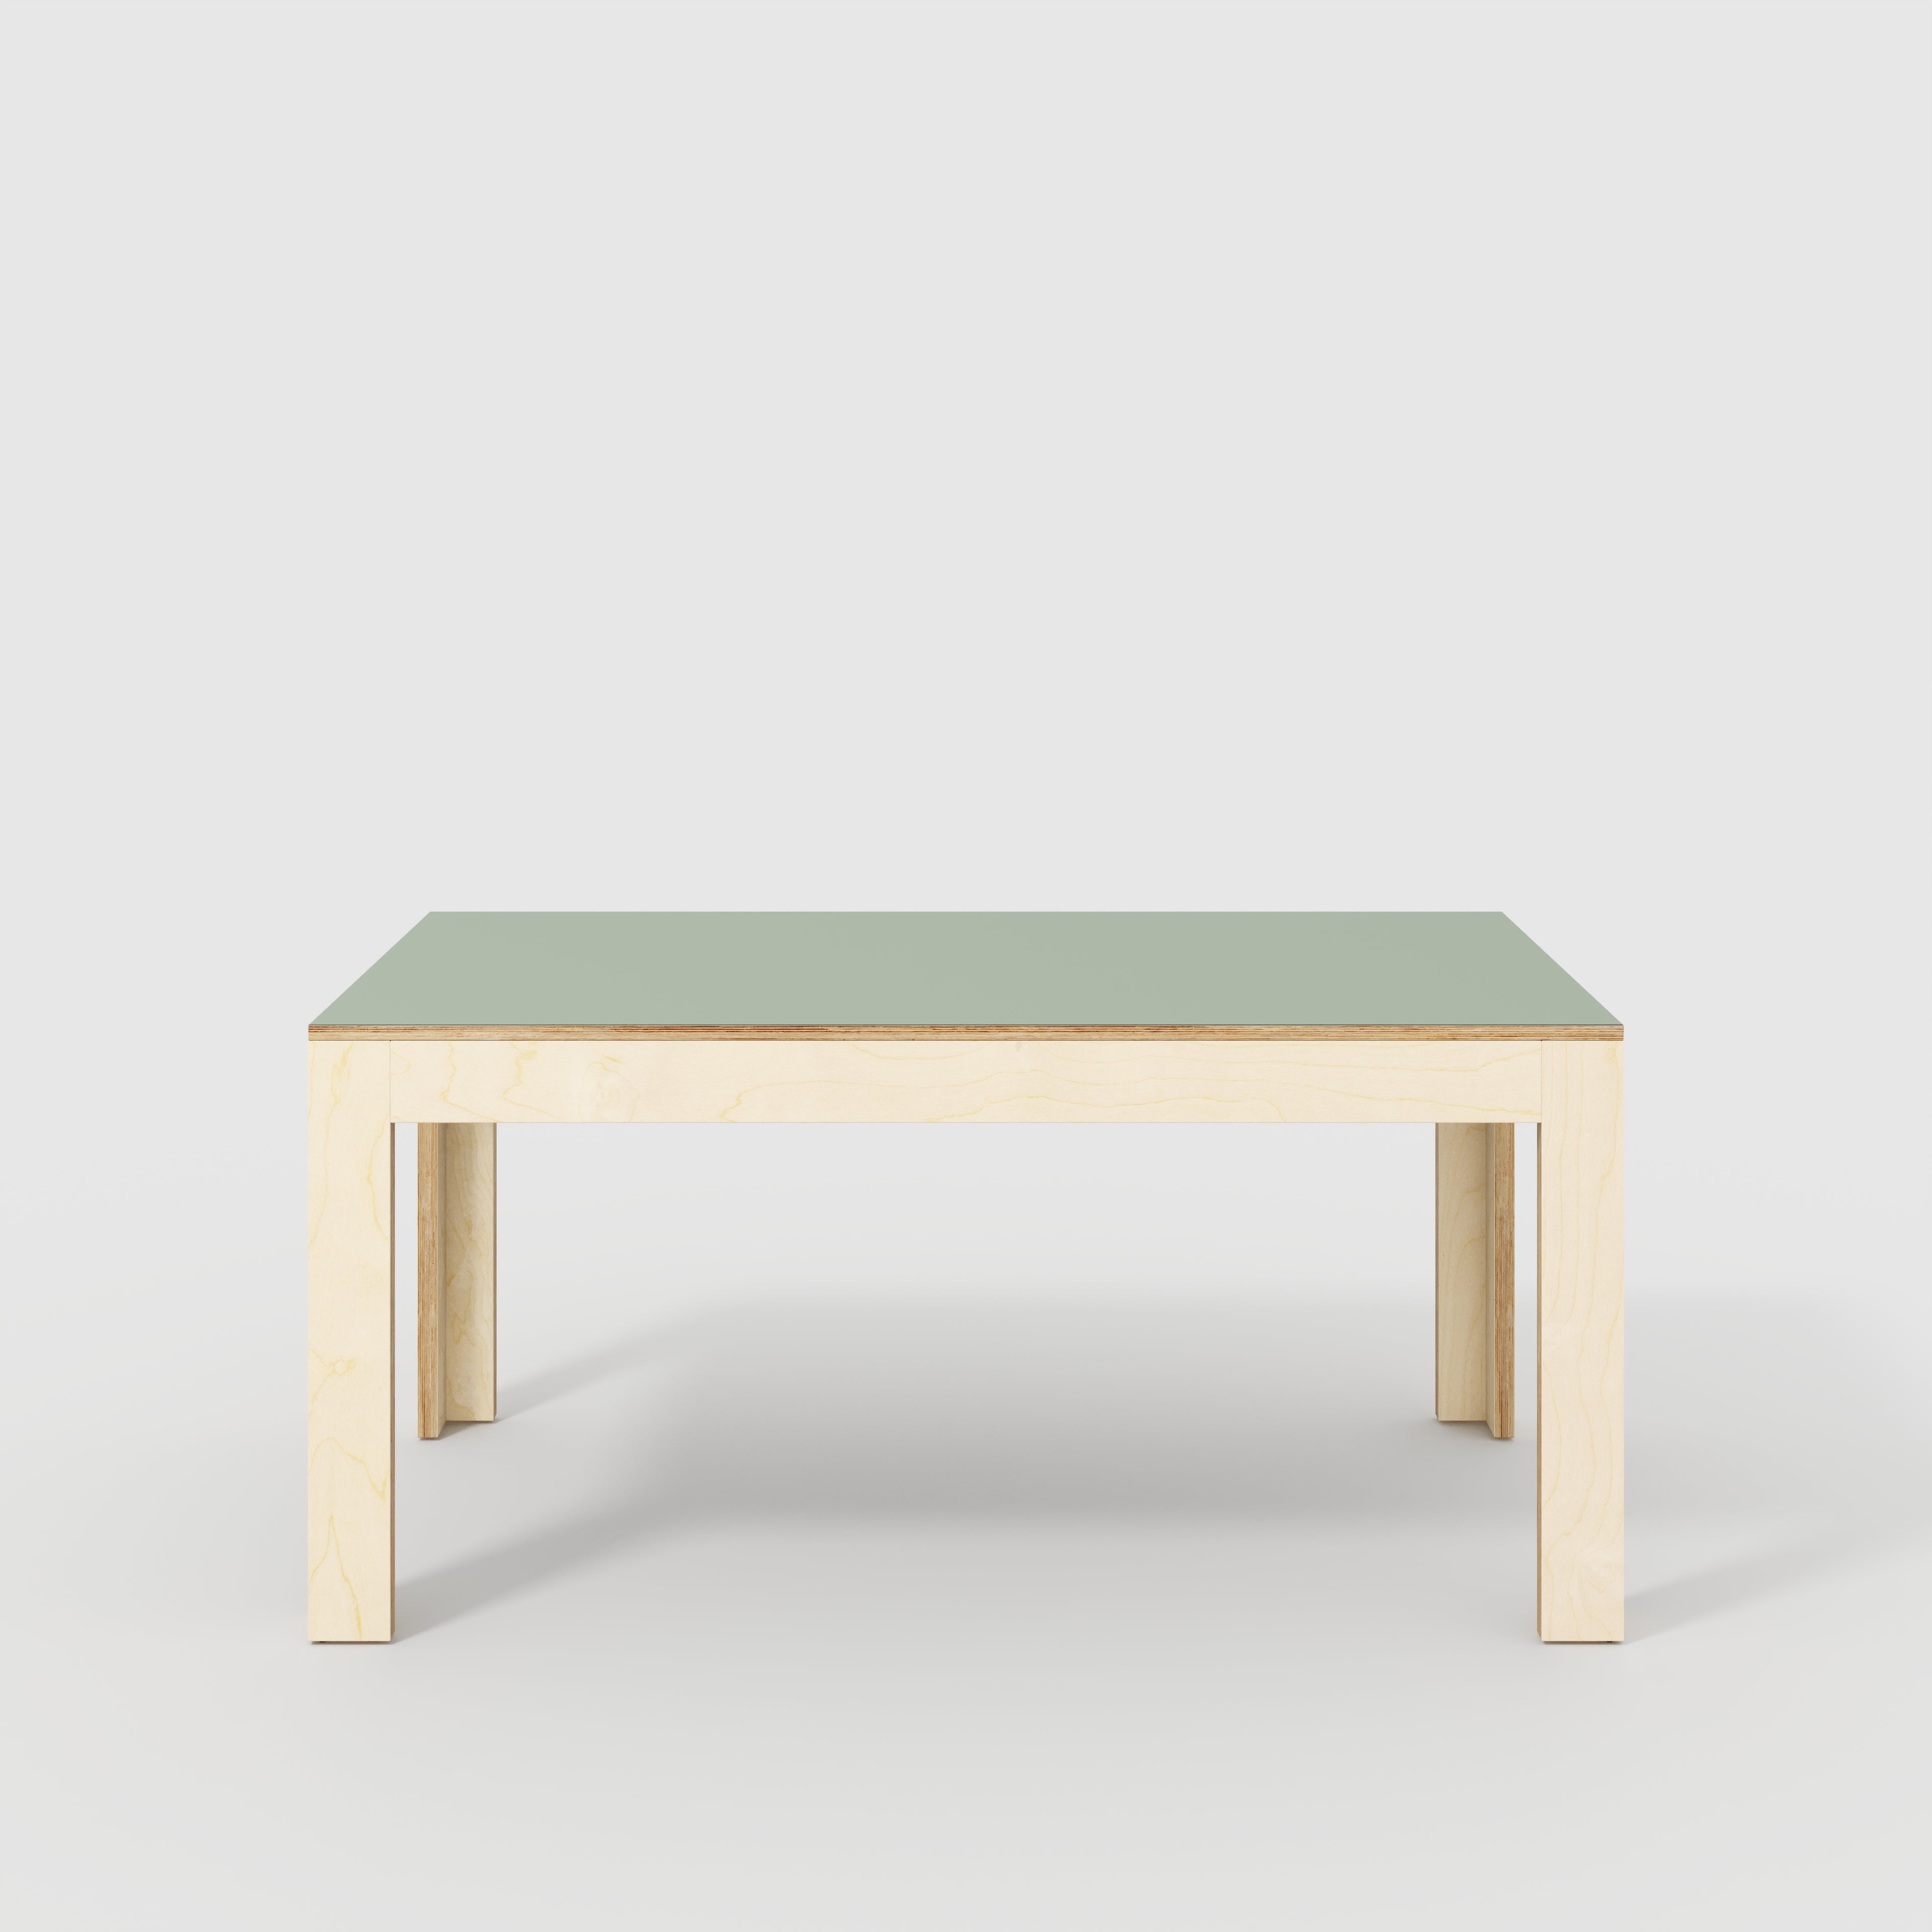 Table with Solid Frame - Formica Green Slate - 1600(w) x 800(d)